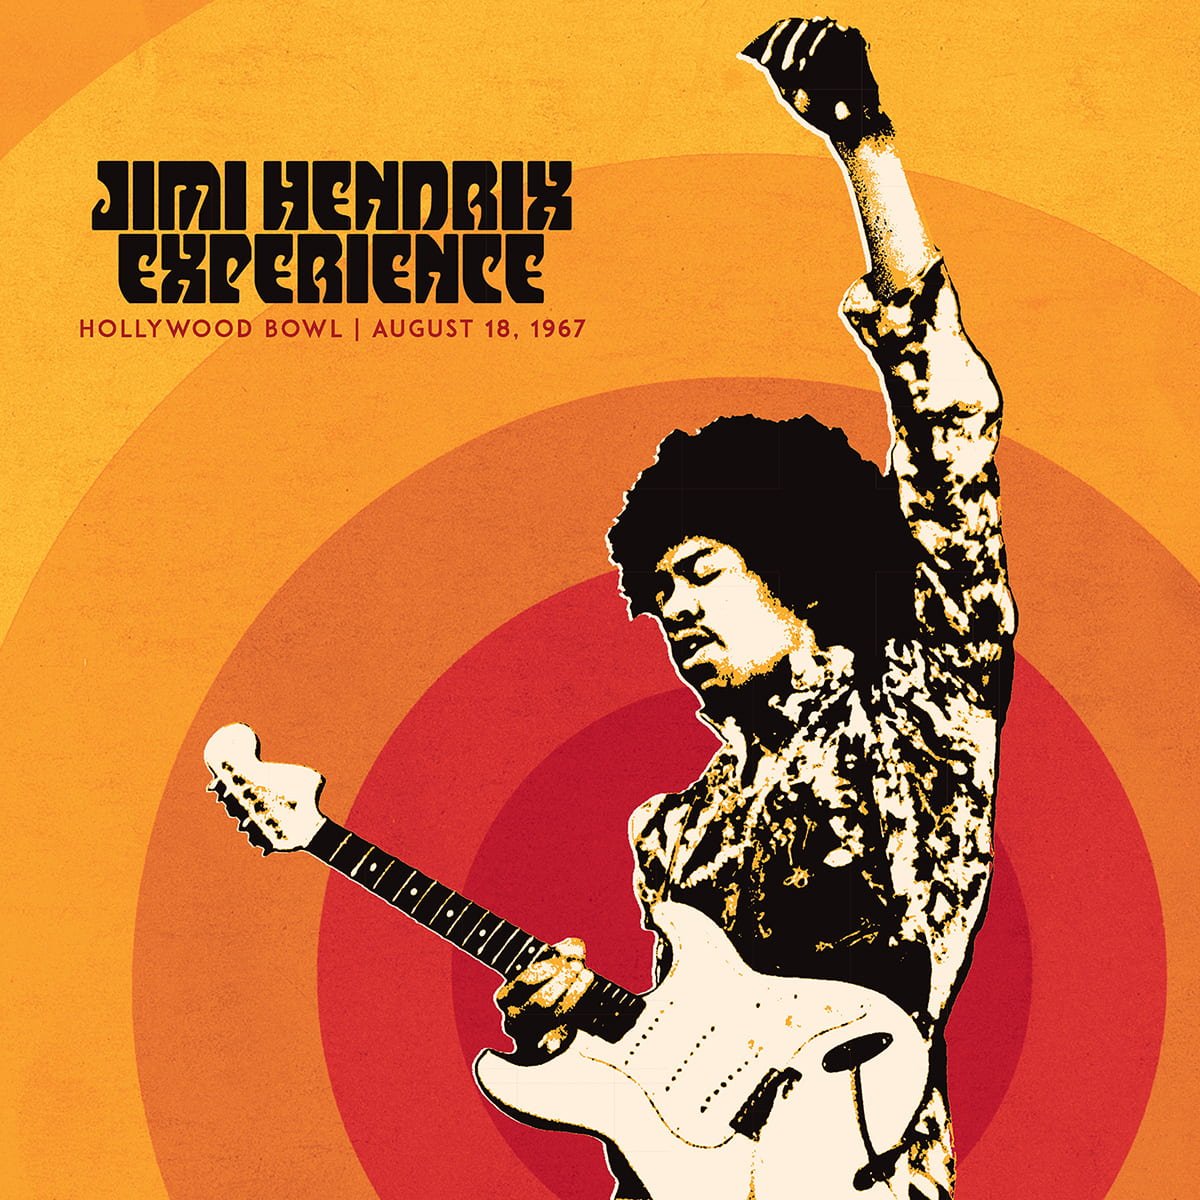 Hendrix Experience, Jimi "Live at the Hollywood Bowl: August 18, 1967"